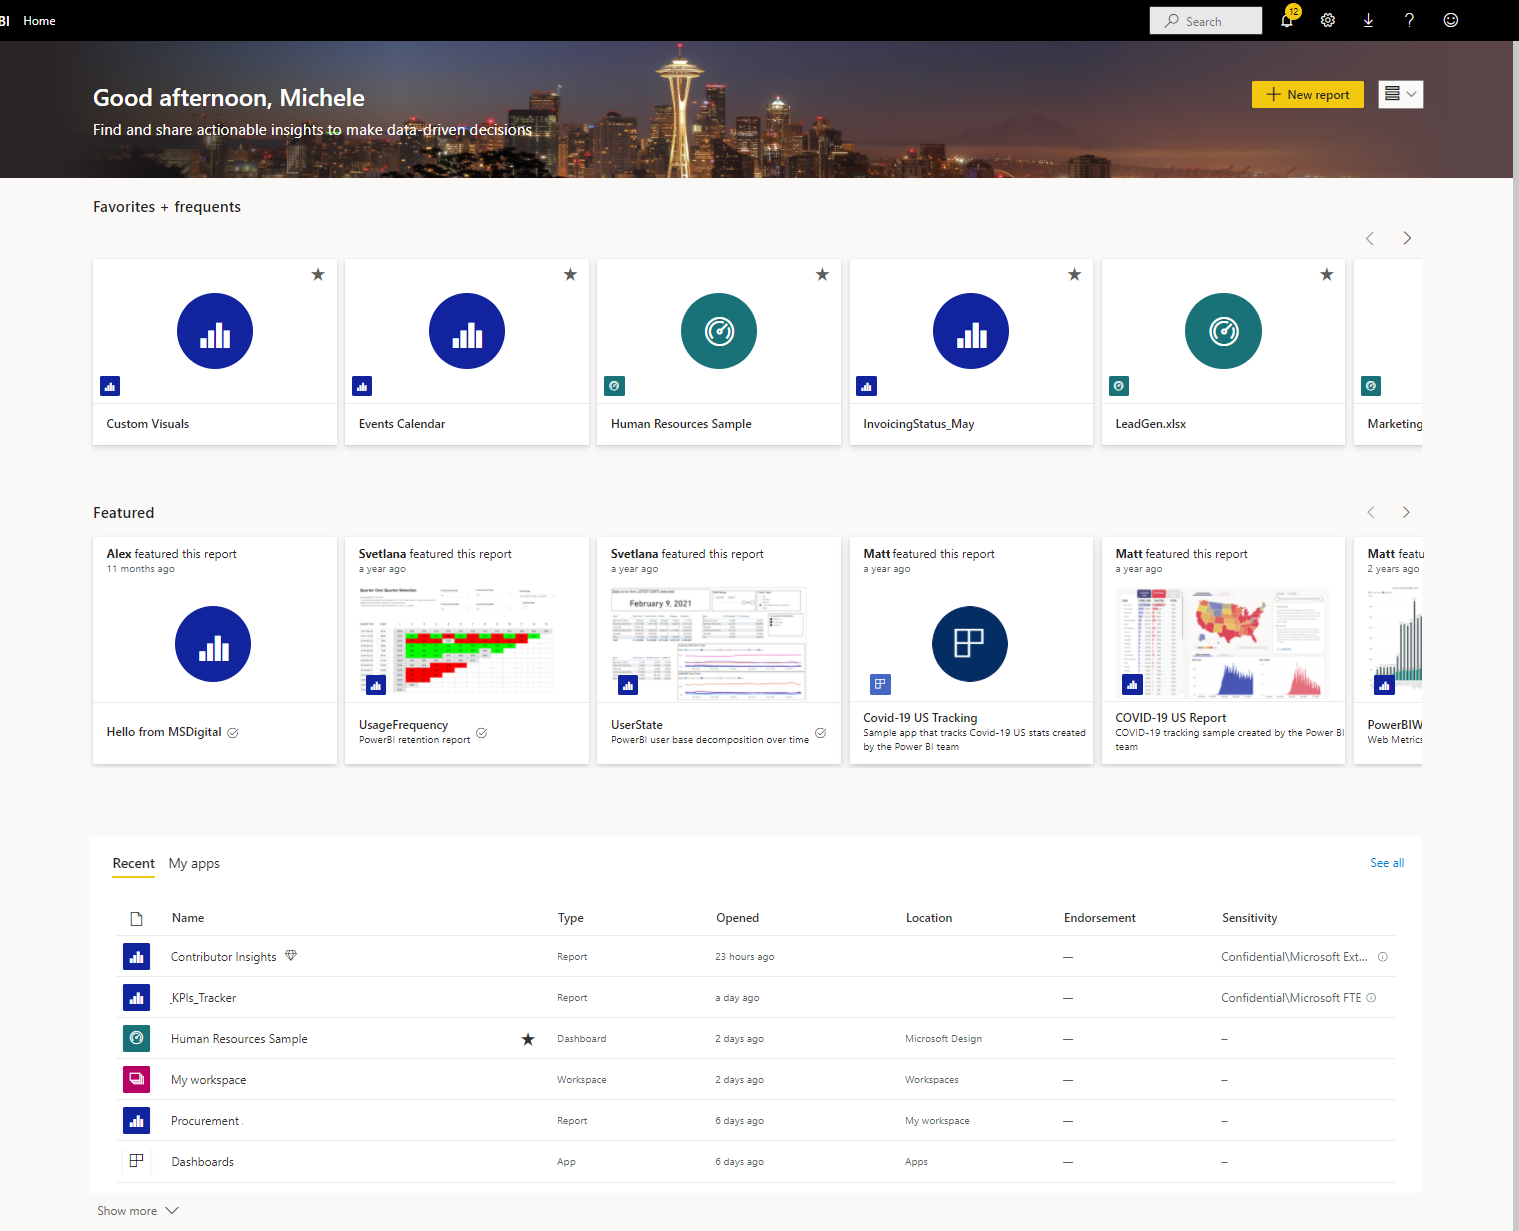 A screenshot of the Welcome screen for the Power BI service.